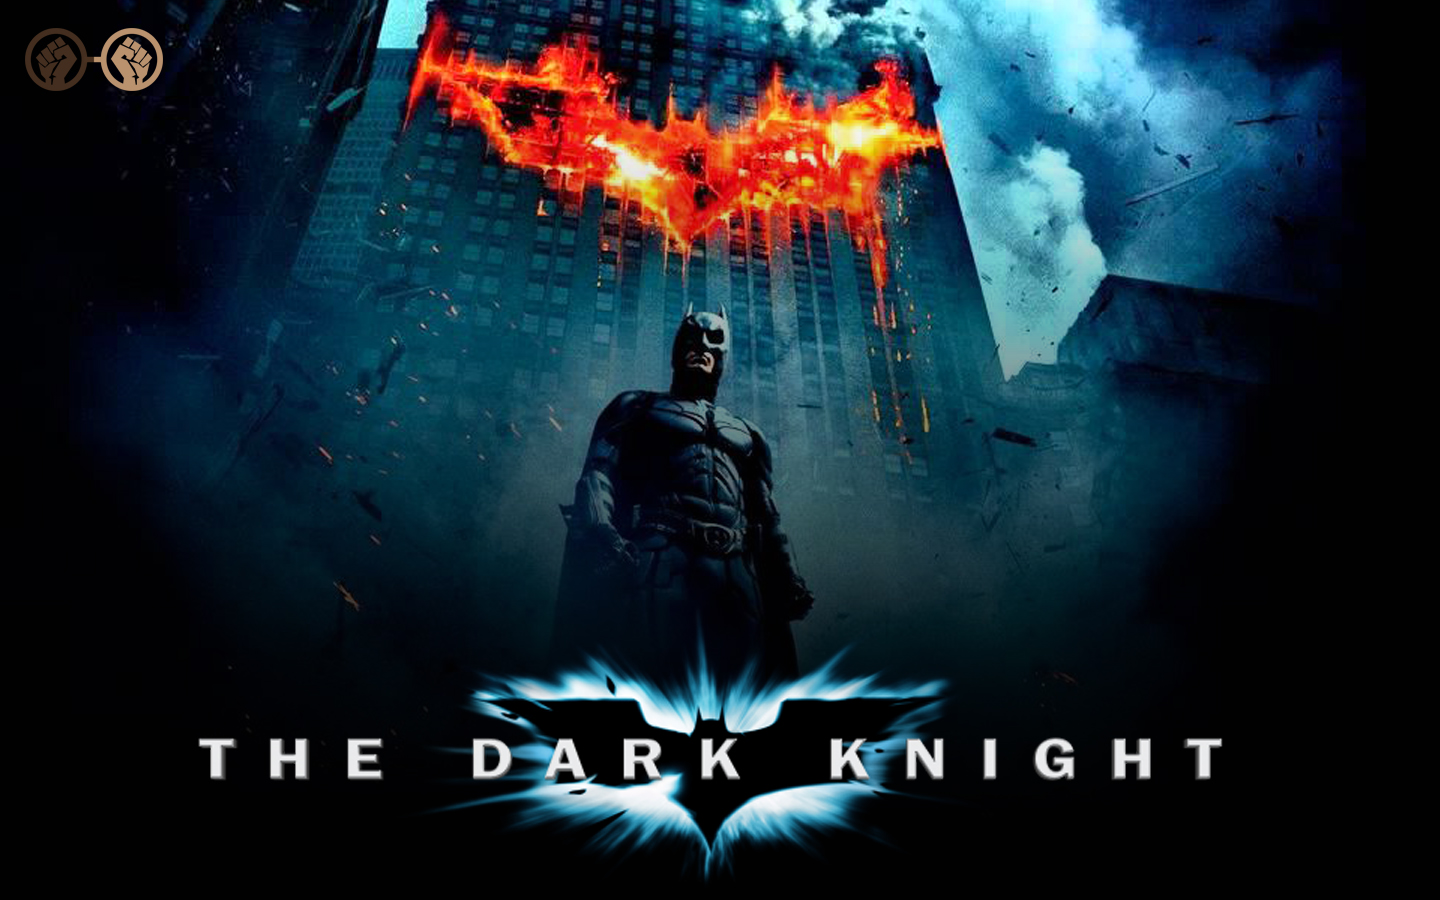 ‘The Dark Knight’ Celebrates Its 10th Anniversary With Exclusive Limited Engagement Screenings in 70MM IMAX